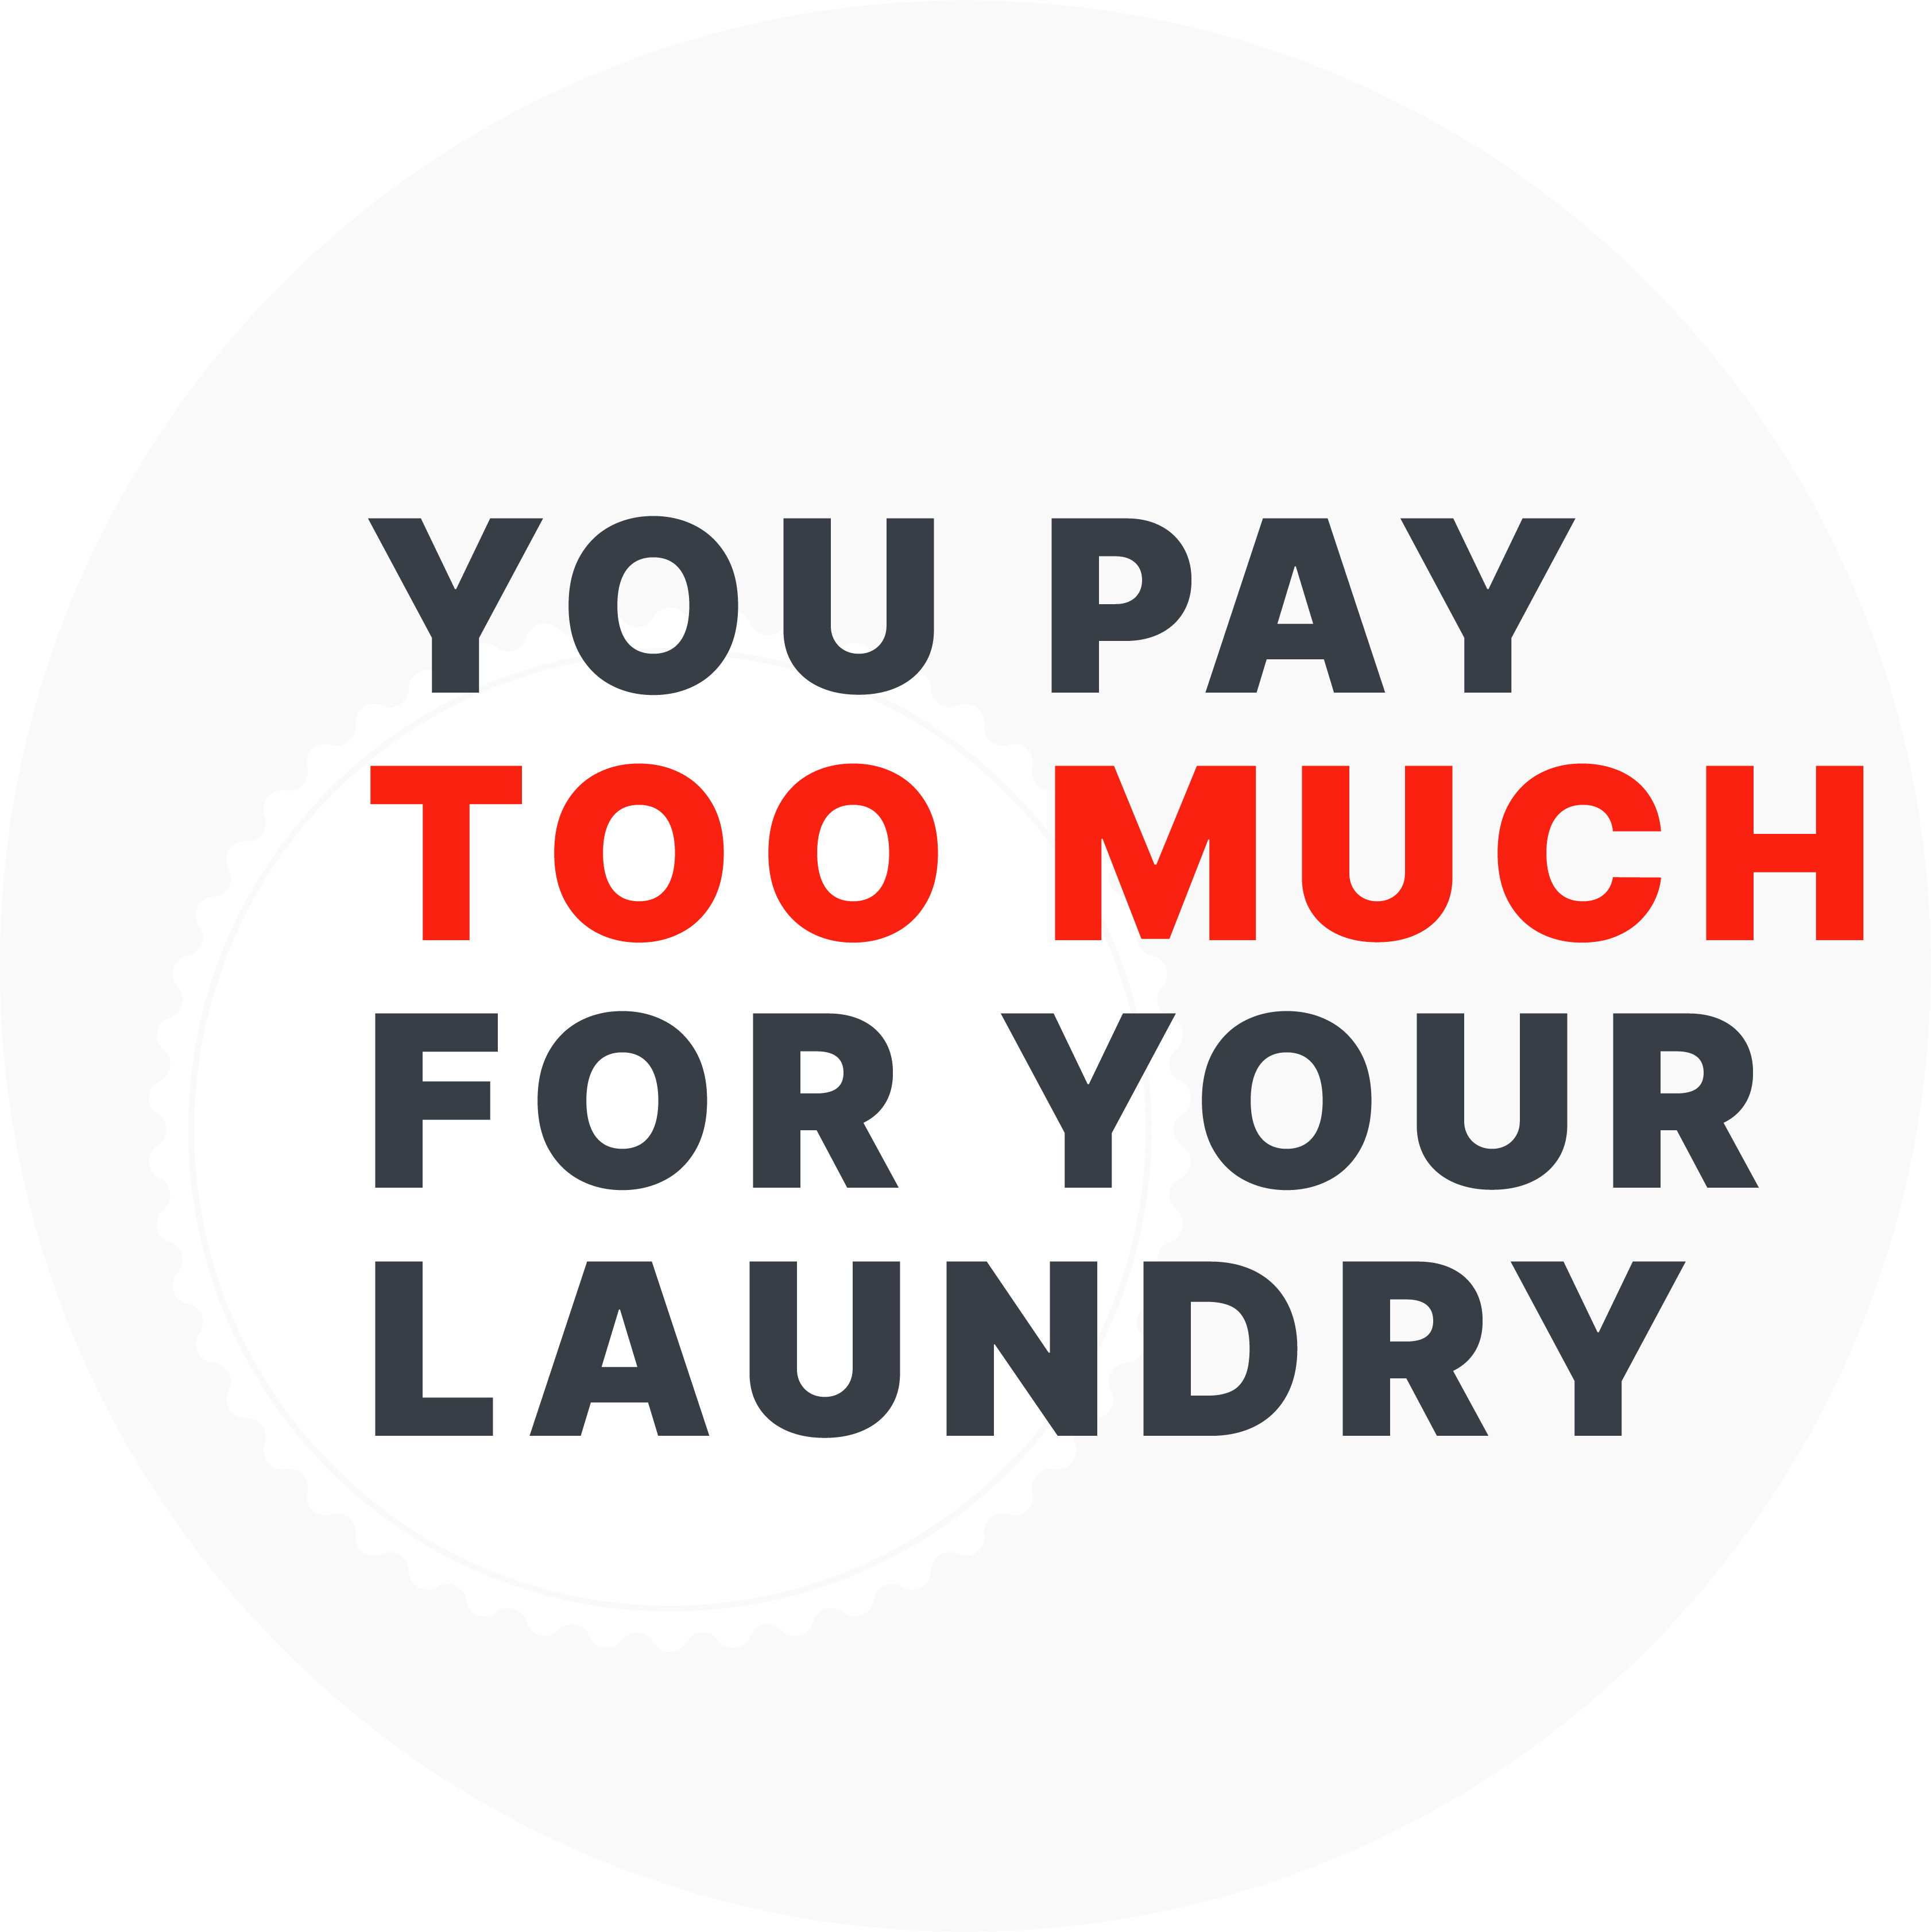 You Pay Too Much For Laundry Graphic-06